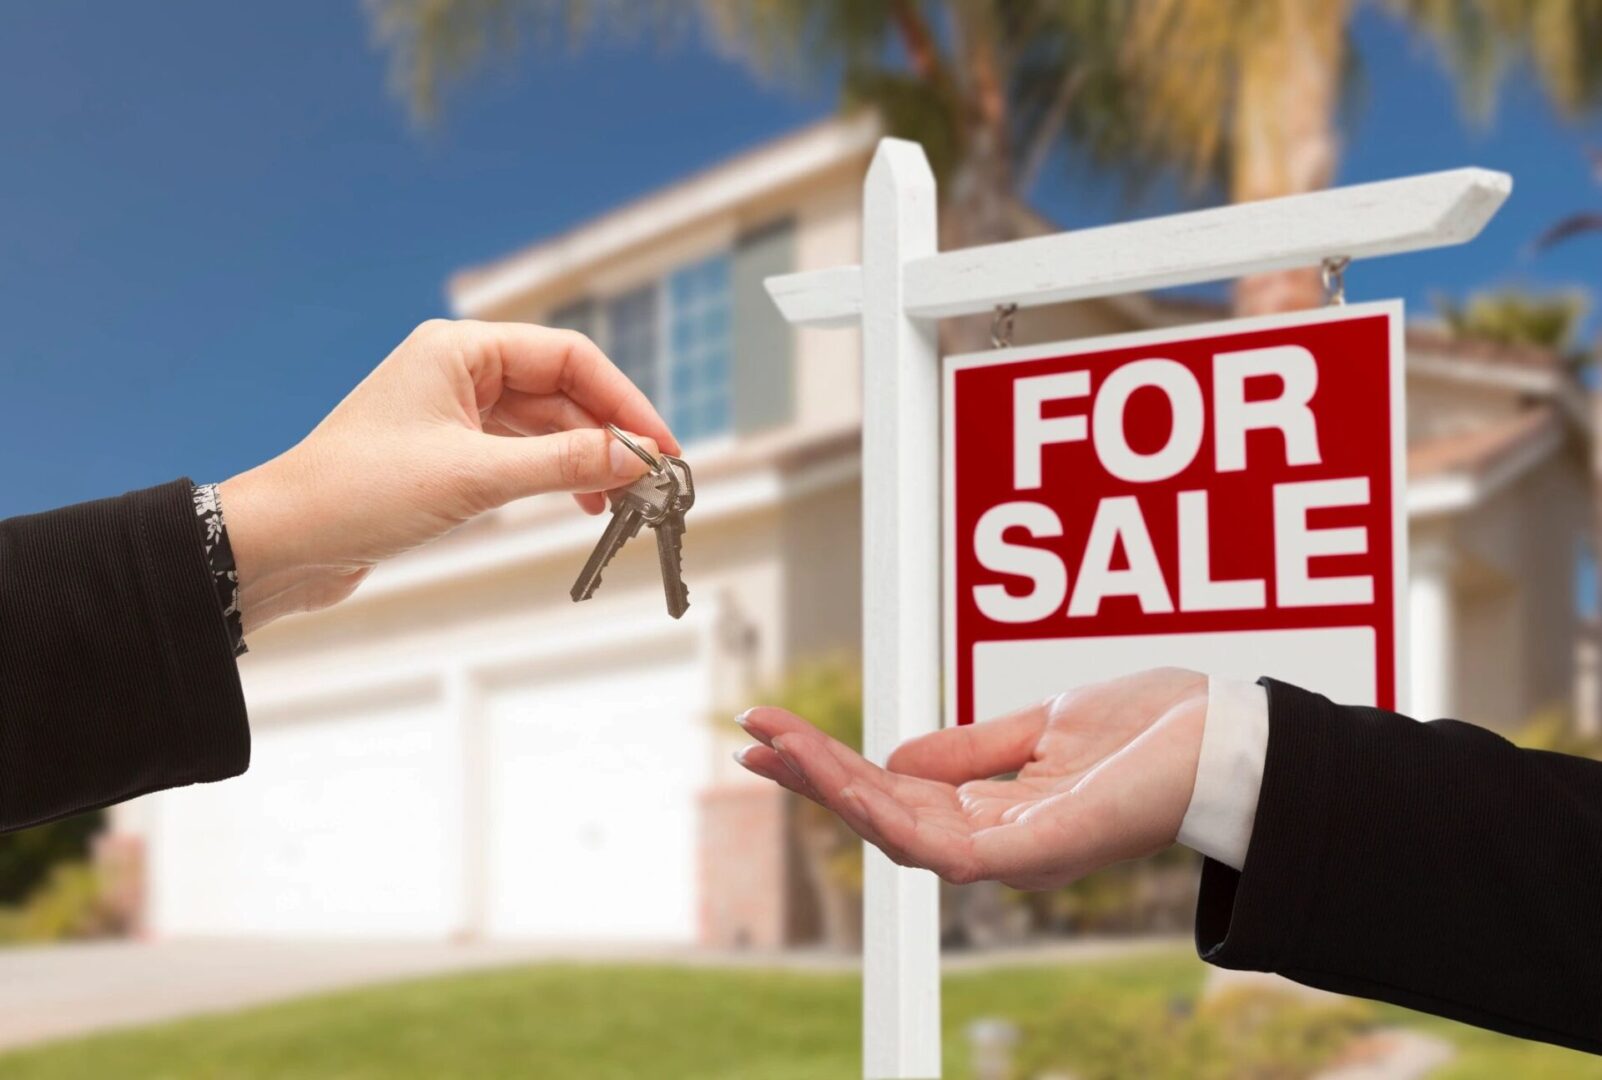 Land for sale. Hand, handing out the key to a property